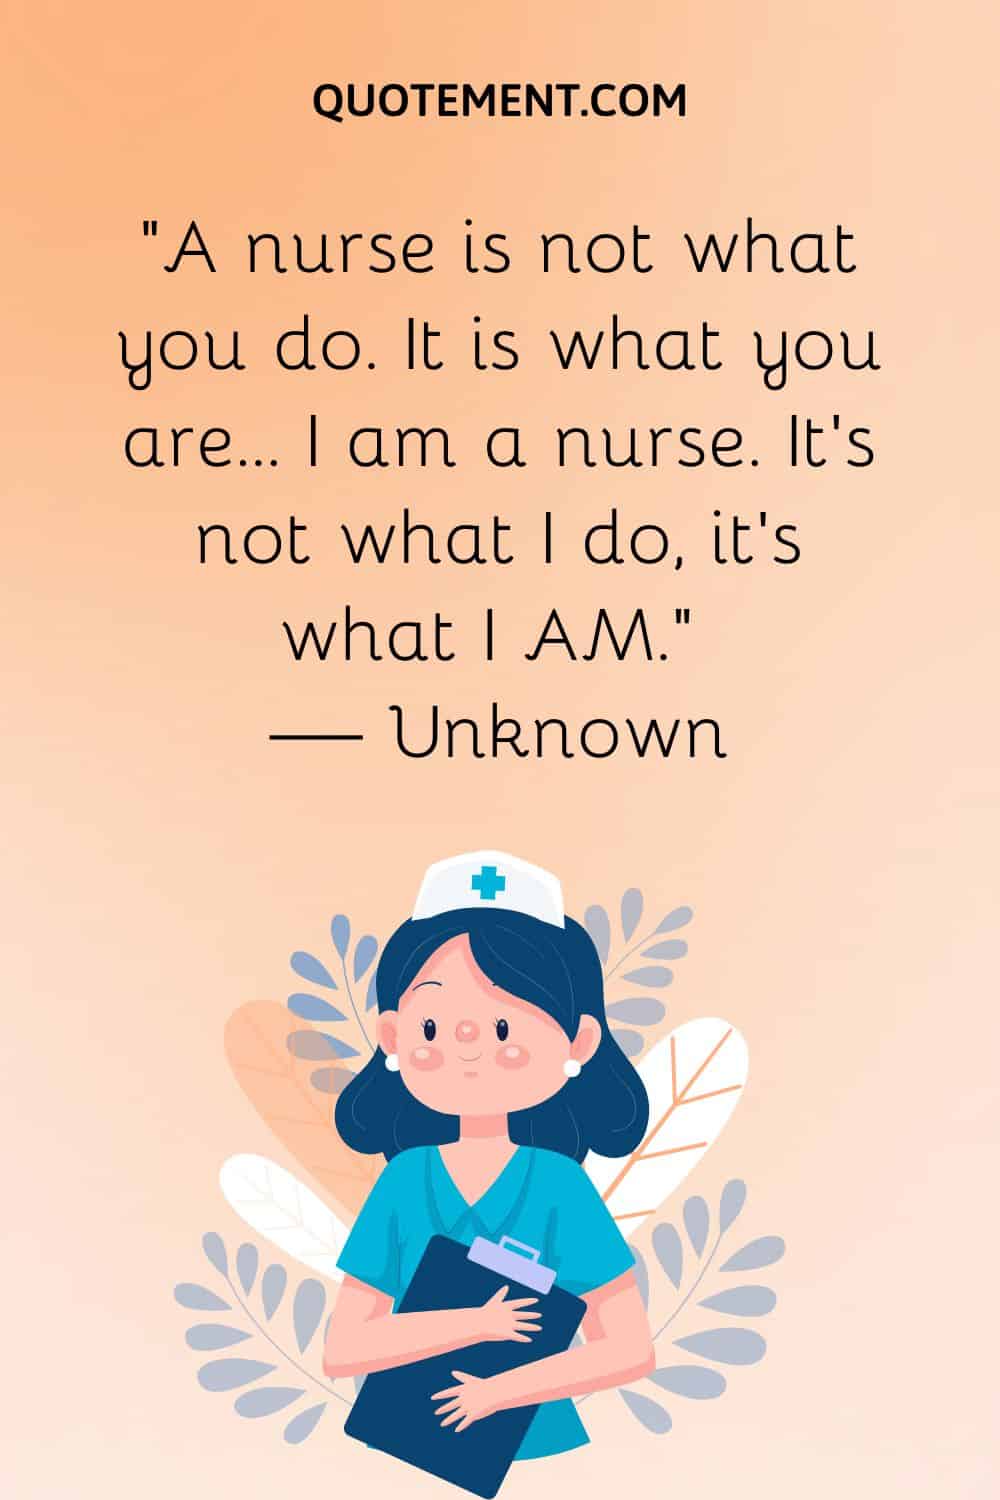 “A nurse is not what you do. It is what you are… I am a nurse. It’s not what I do, it’s what I AM.” — Unknown